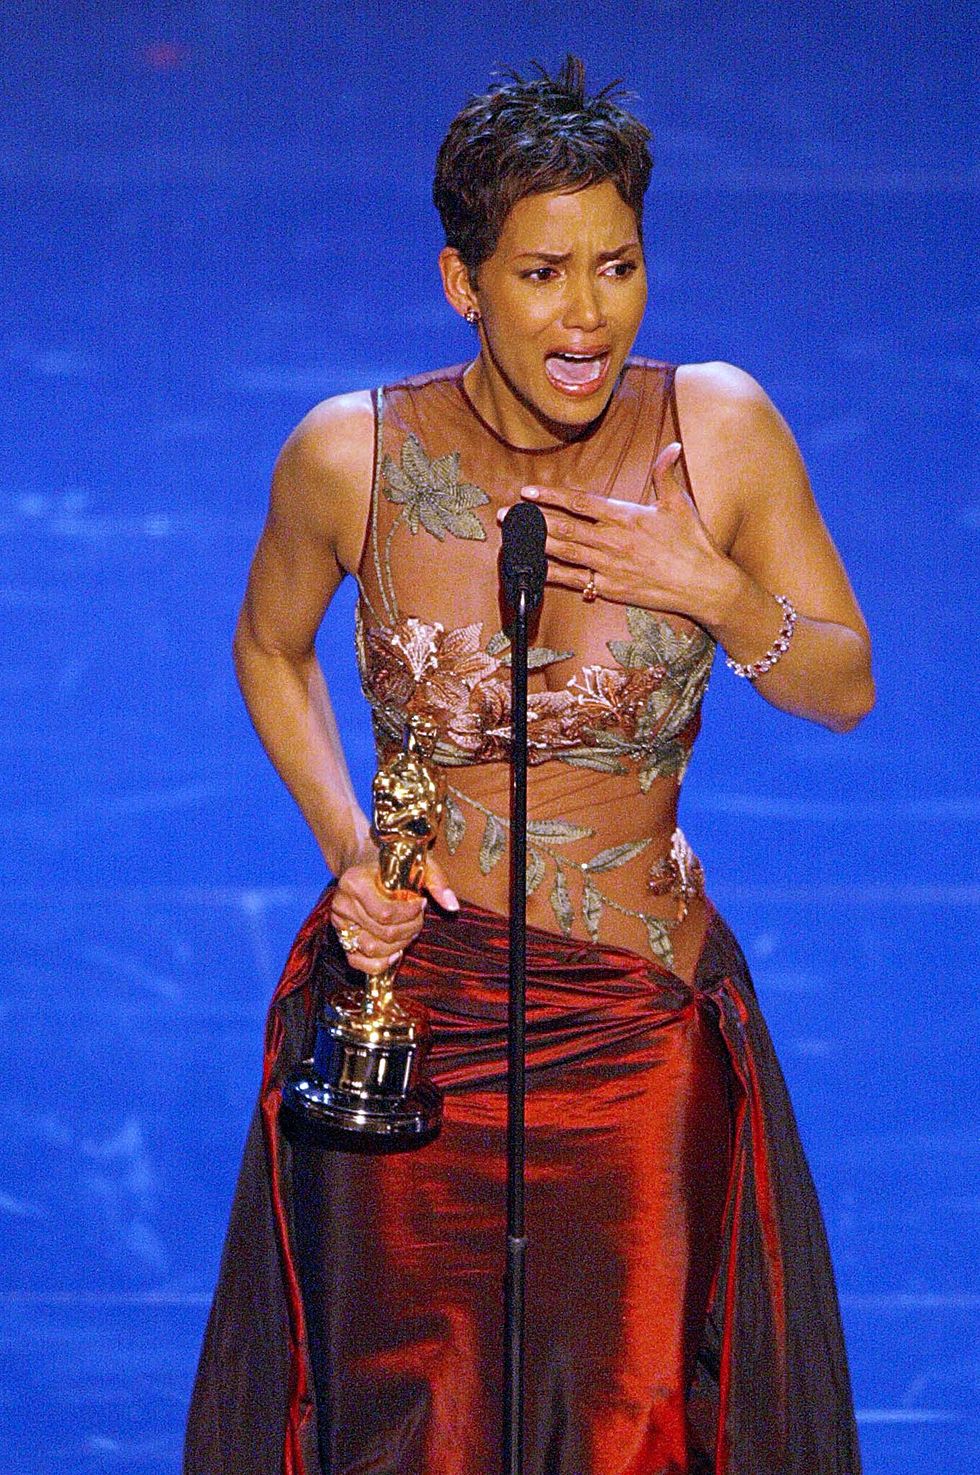 hollywood,   us actress halle berry accepts her oscar for best performance by an actress in a leading role during the 74th academy awards at the kodak theatre in hollywood 24 march 2002  afp photo  timothy a clary photo credit should read timothy a claryafp via getty images